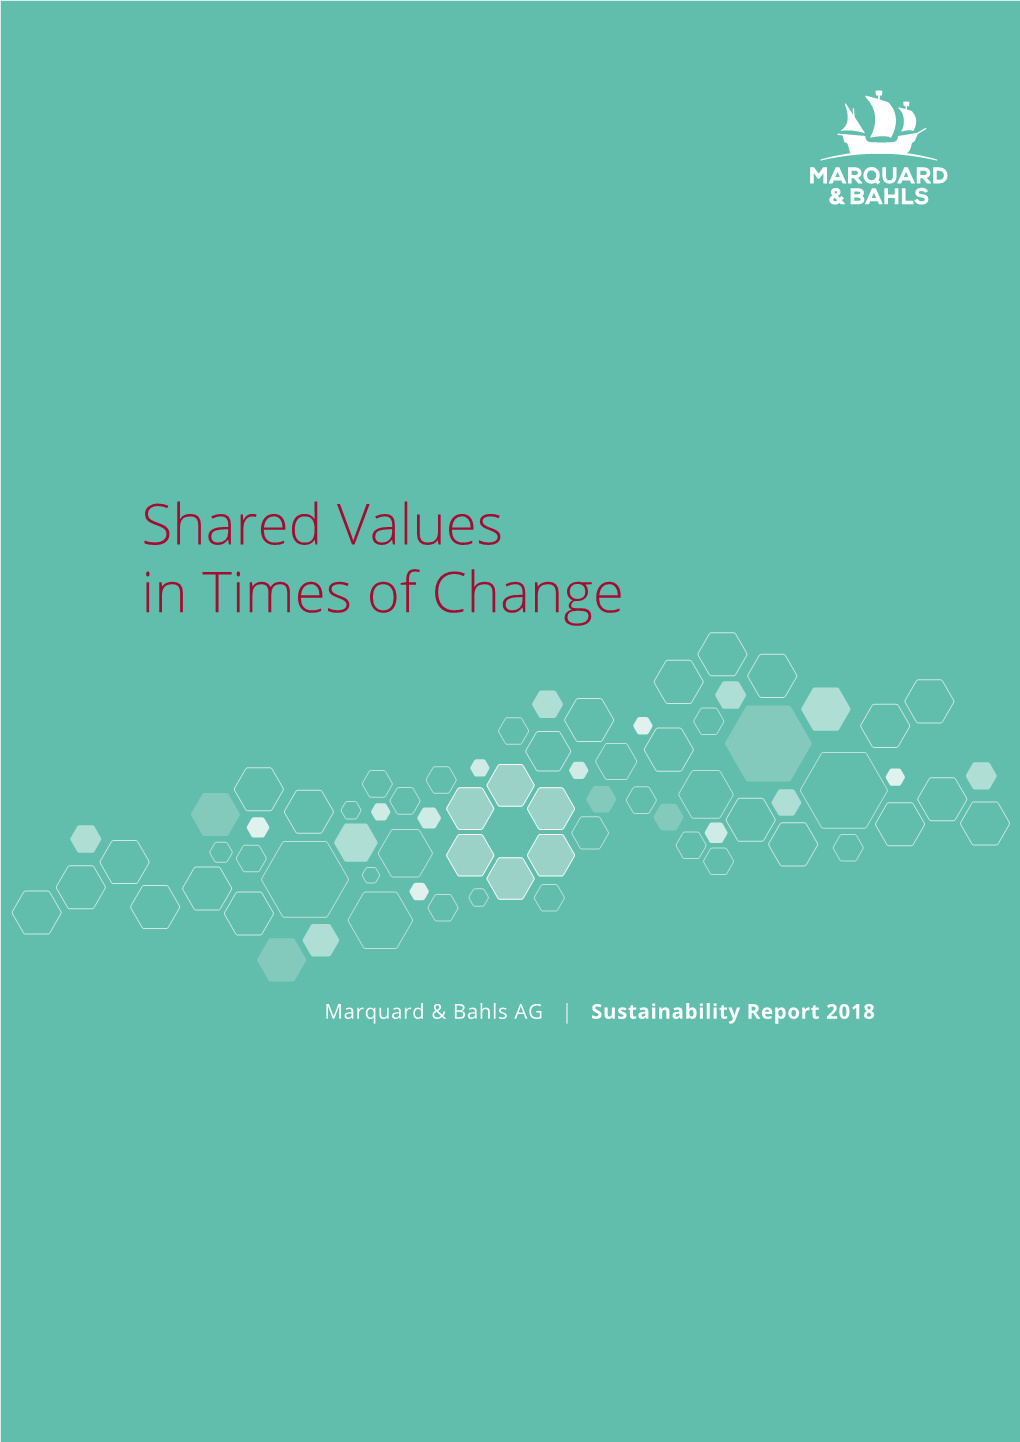 Sustainability Report 2018 Marquard & Bahls » Sustainability Report 2018